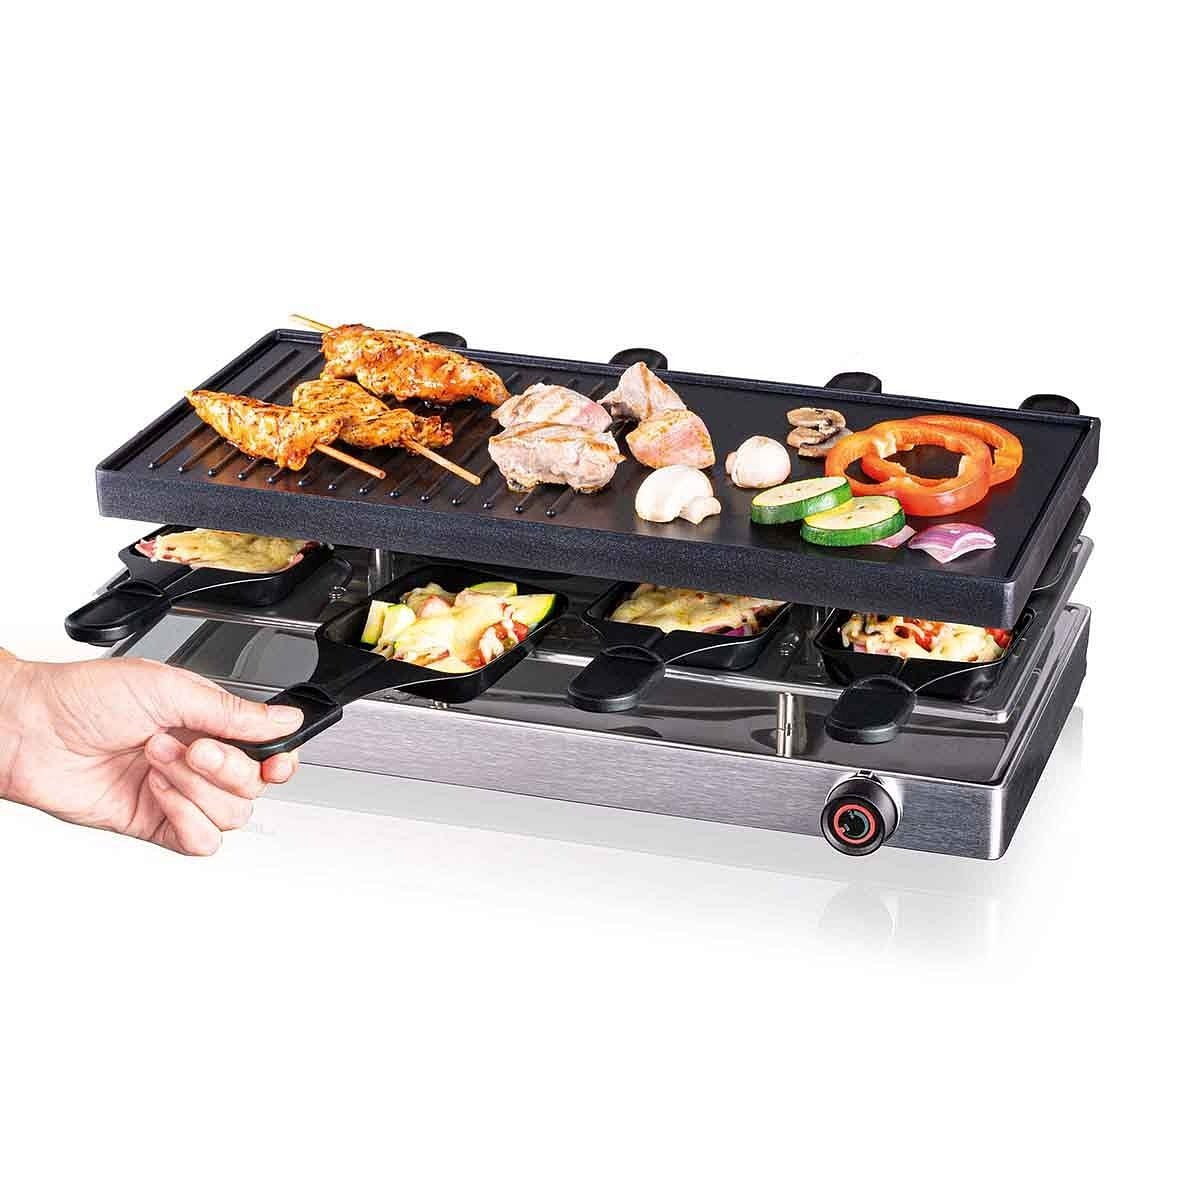 Cloer Raclette Grill (8 pers.) - 6458